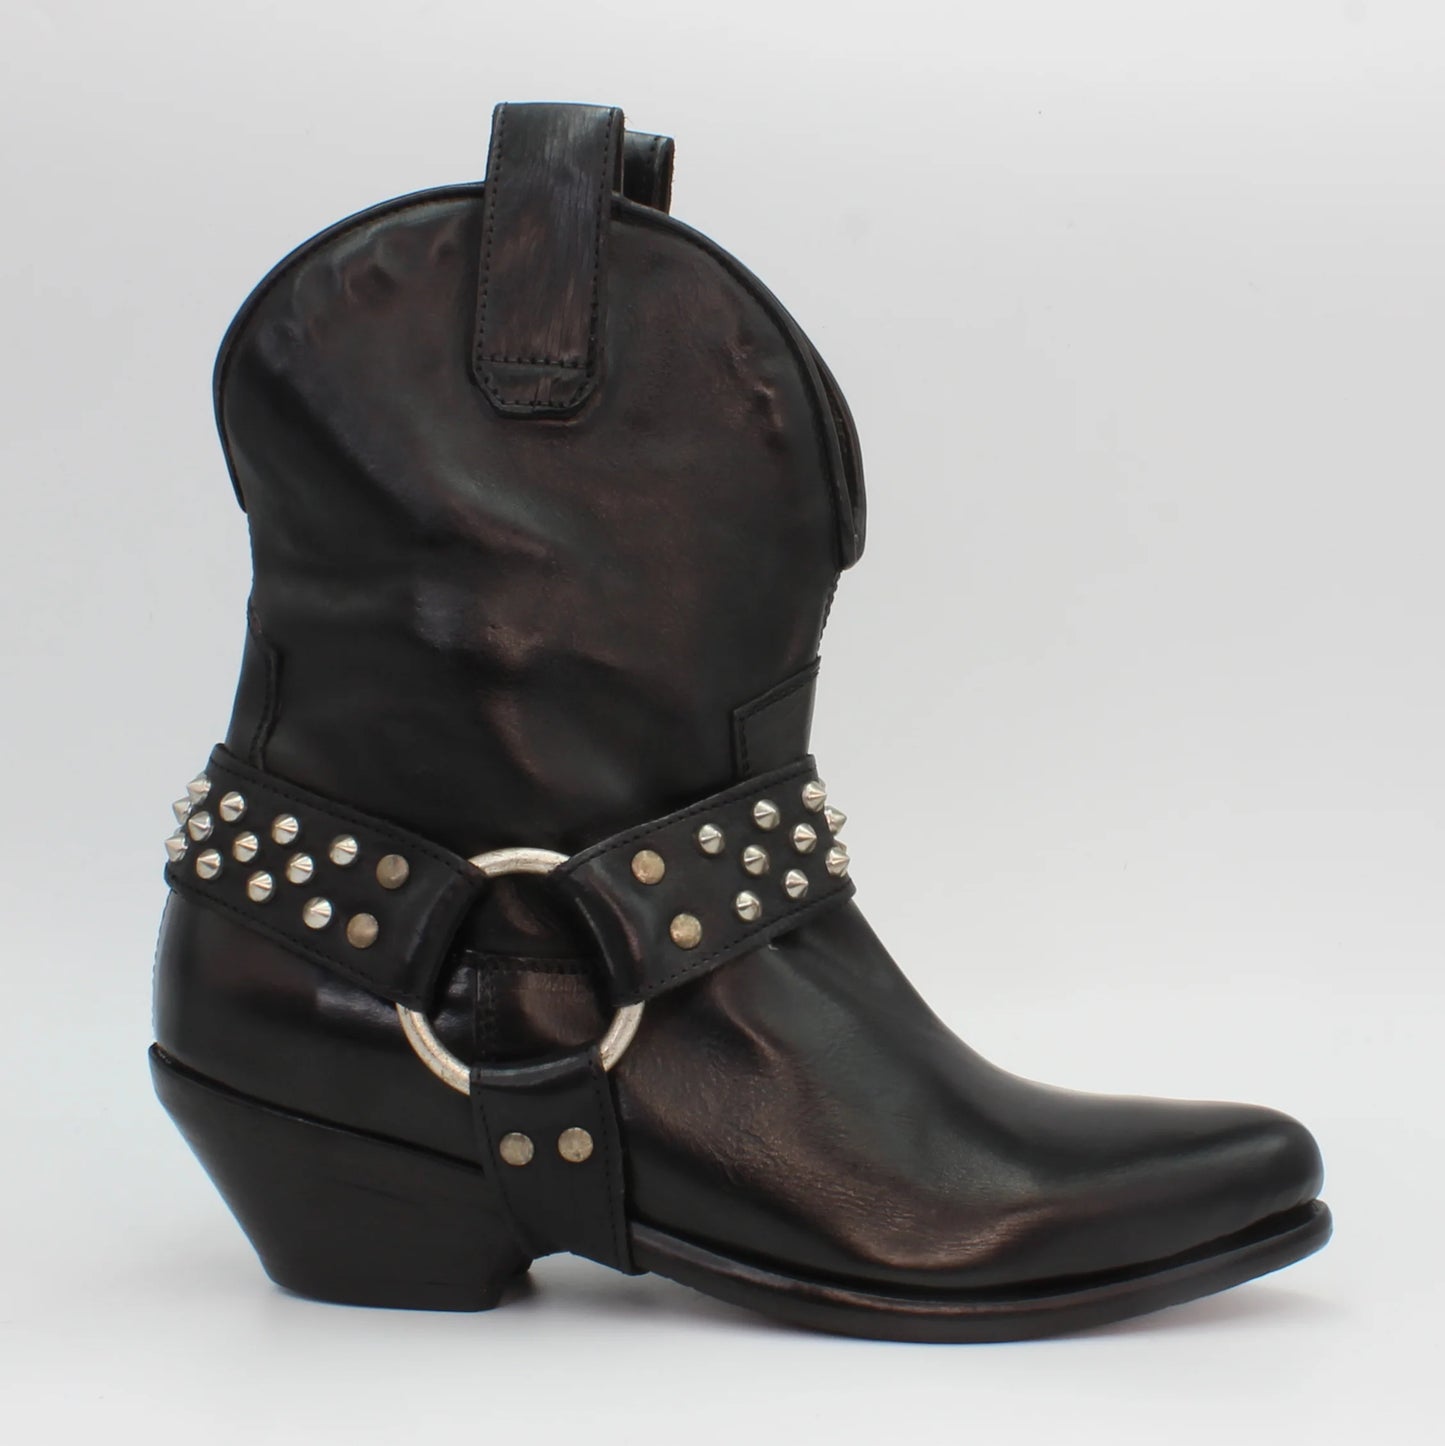 Ladies genuine leather Italian low western boot with studs in black made in Italy exclusively for Aliverti